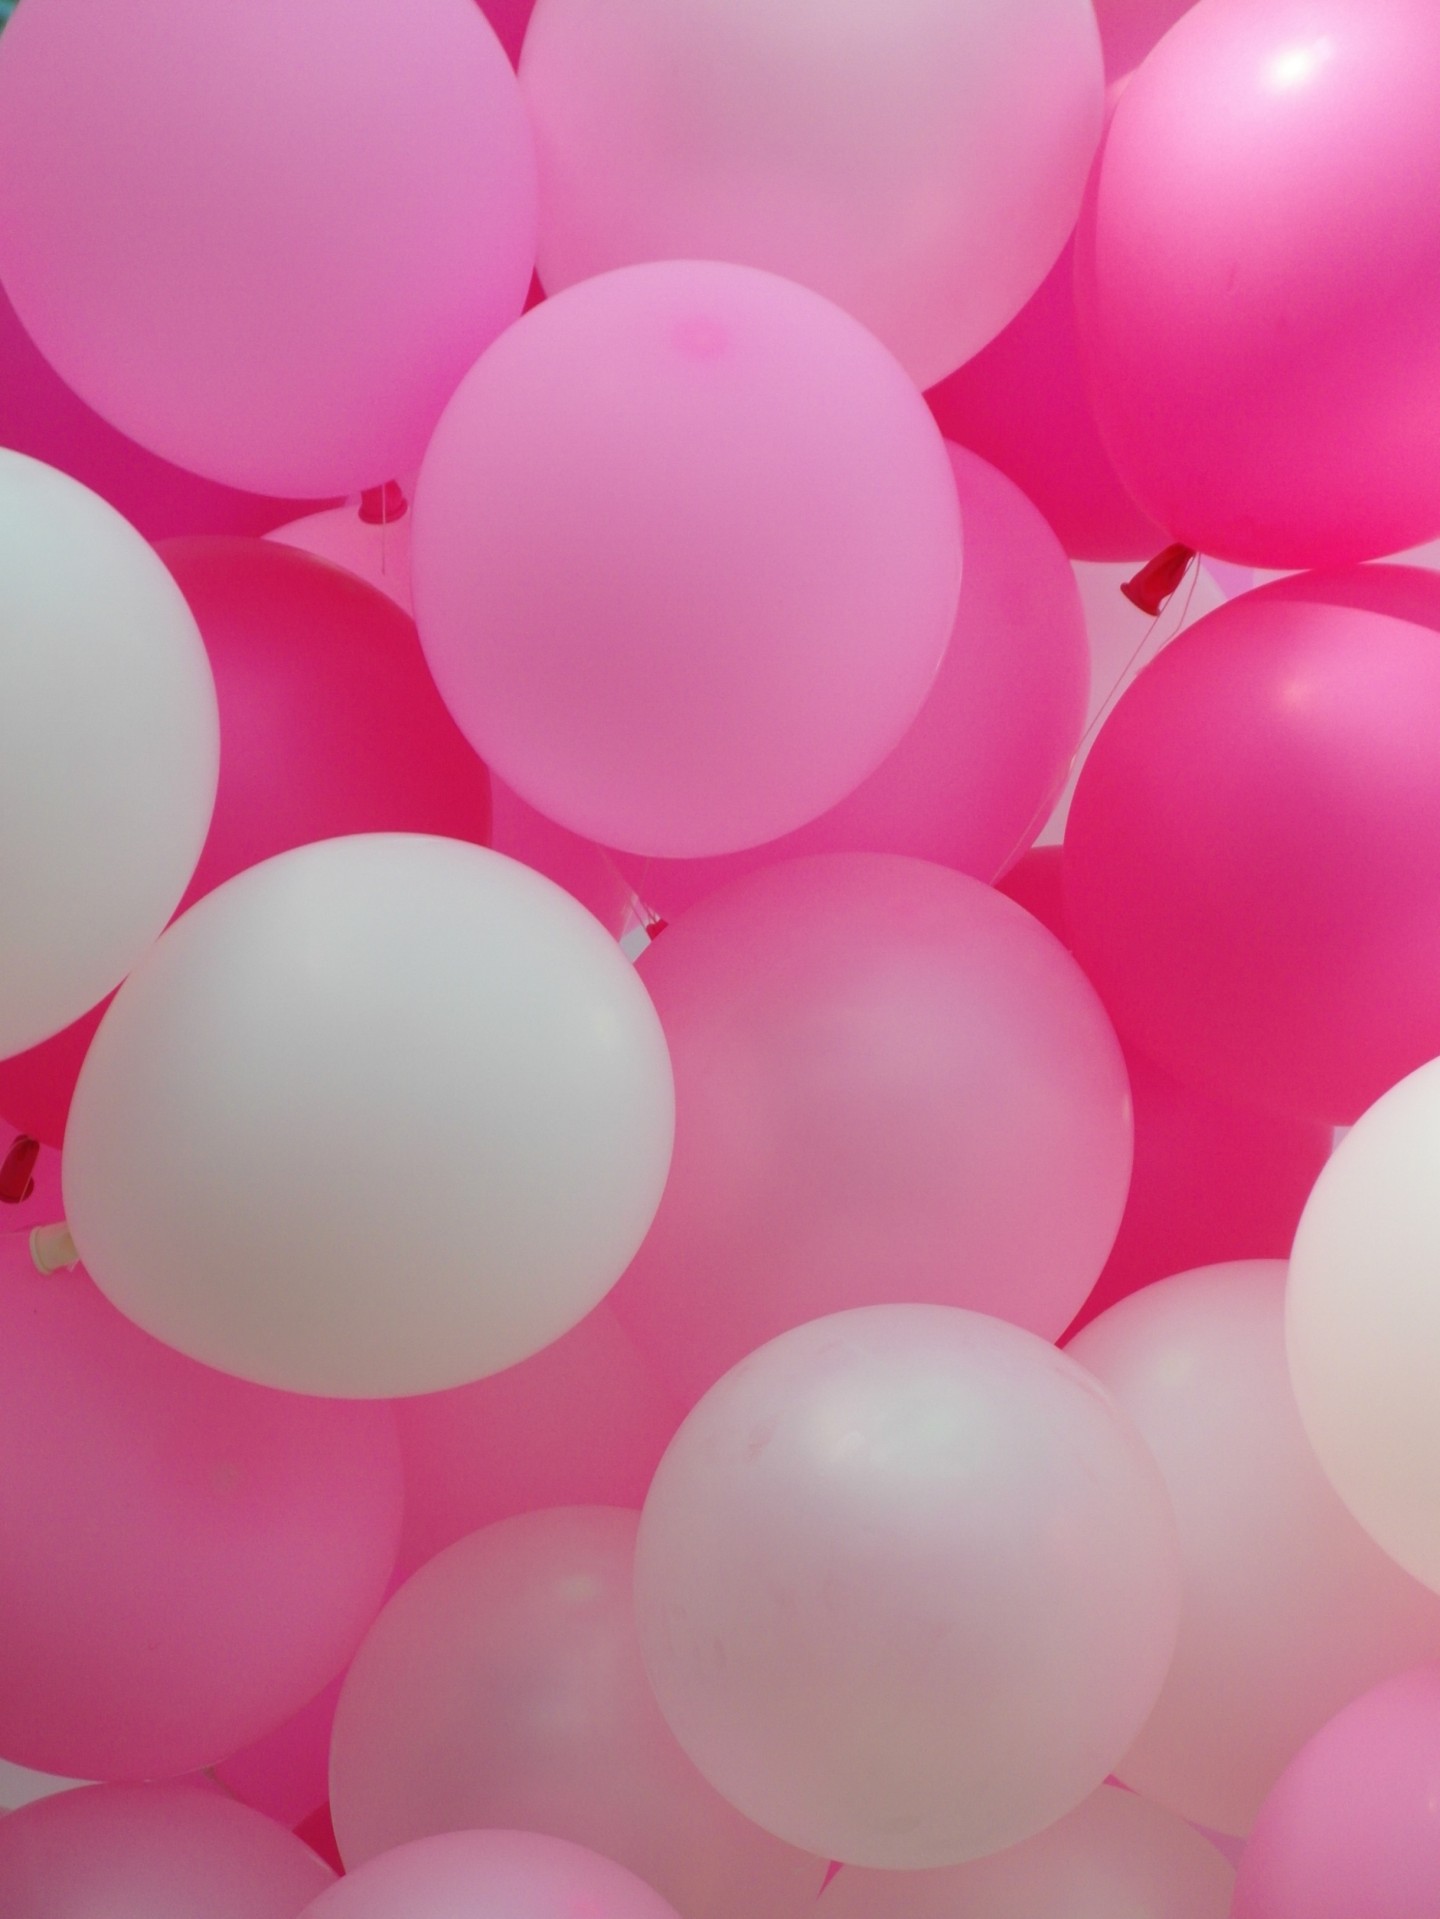 Pink Balloons Free Stock Photo - Public Domain Pictures